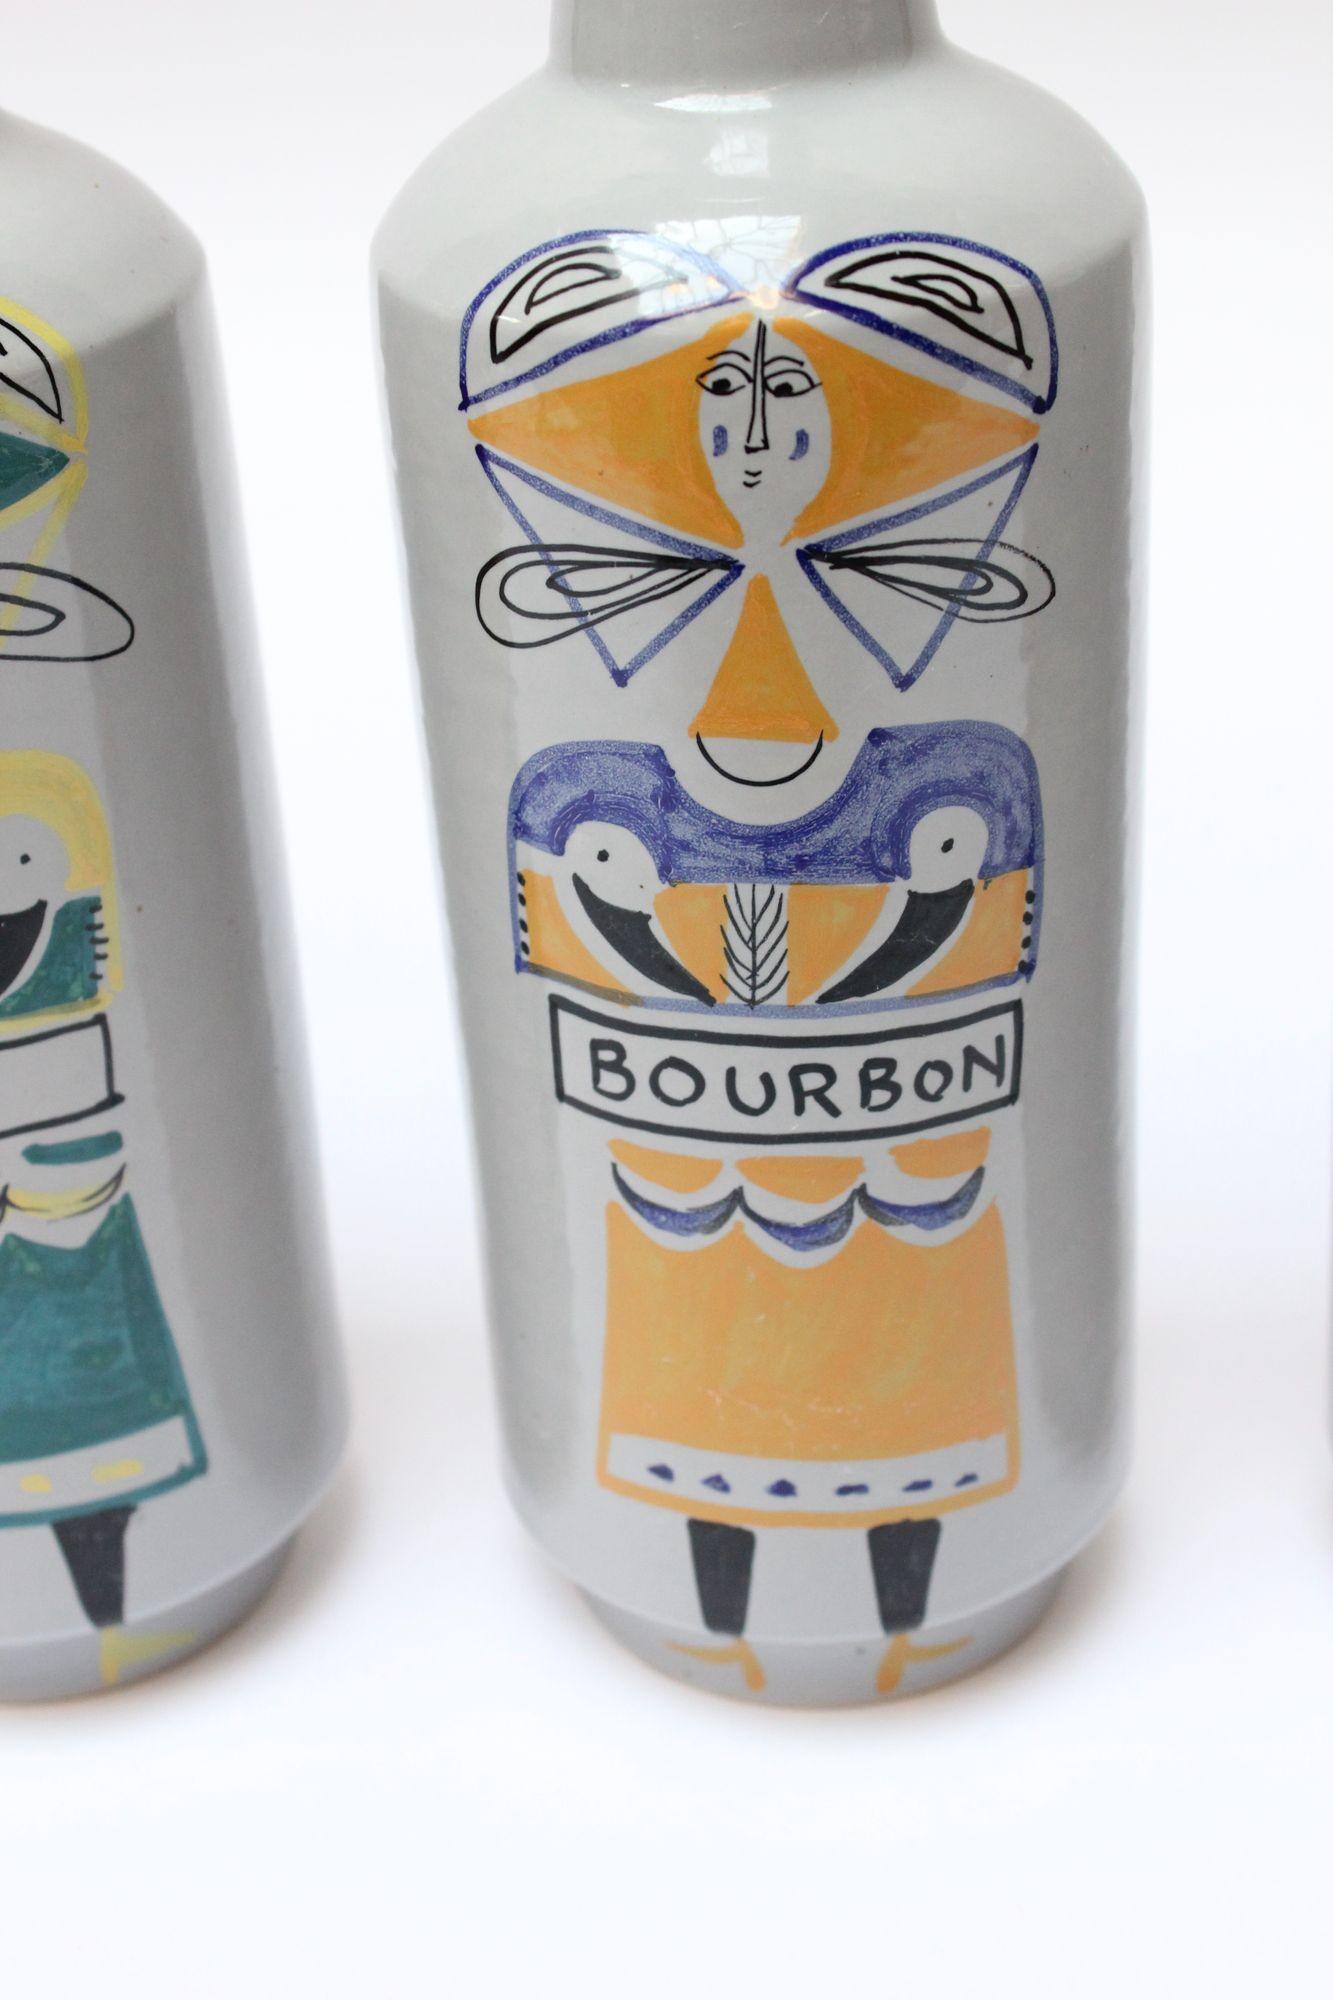 Scarcely seen set of five ceramic spirits bottles with original stoppers by Raymor (ca. 1950s, Italy). Each has a hand-painted figure in an individualized color indicating a specific spirit (Bourbon, Scotch, Gin, Vodka, and Rye). Charming grouping